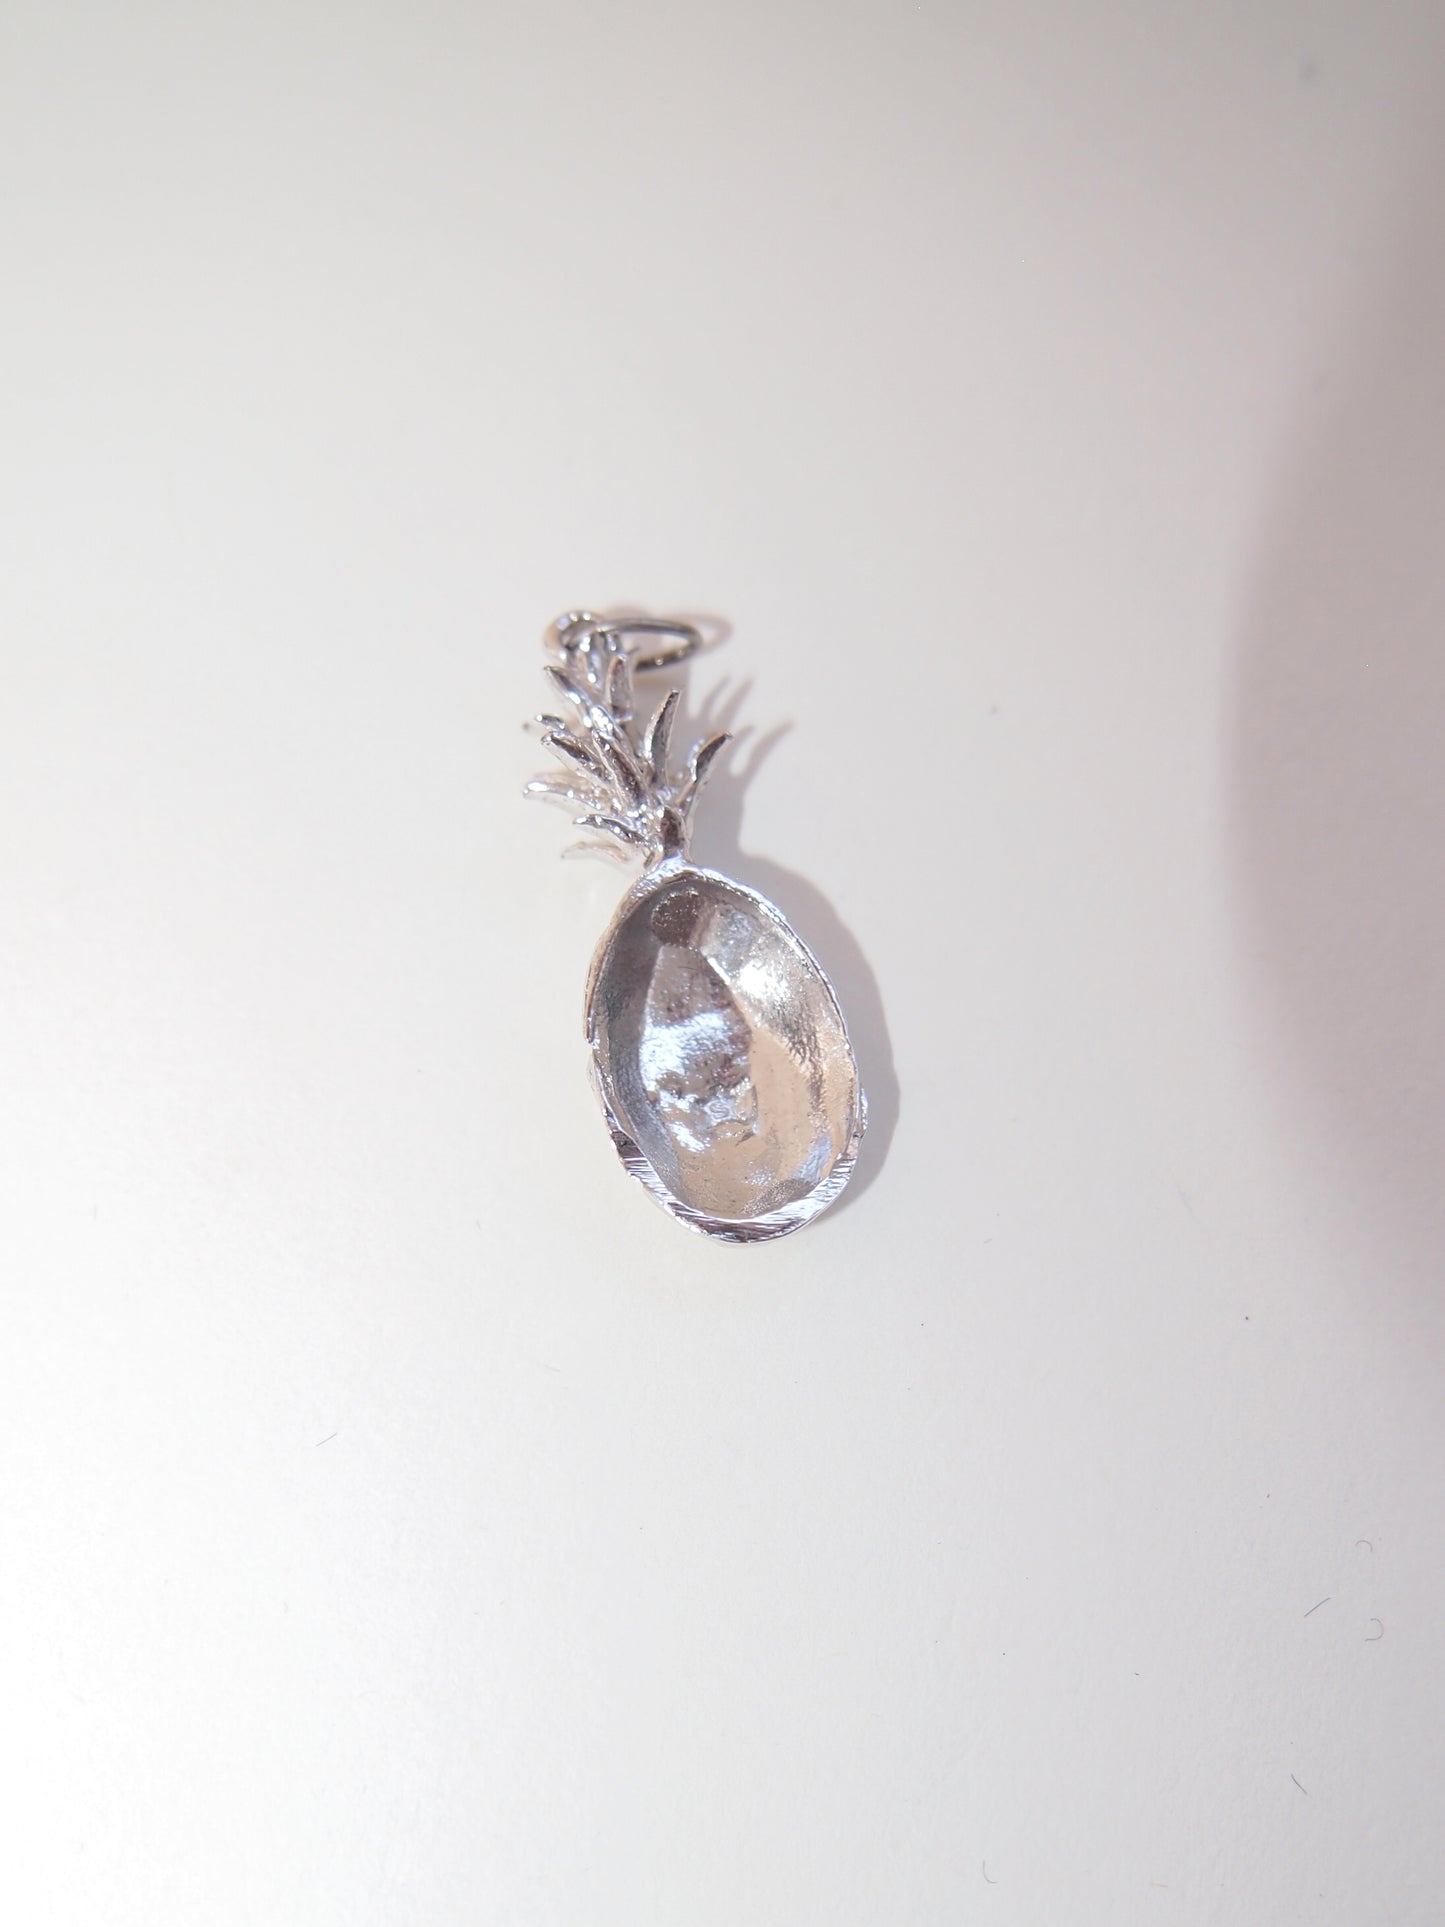 Silver Charm "Pineapple"